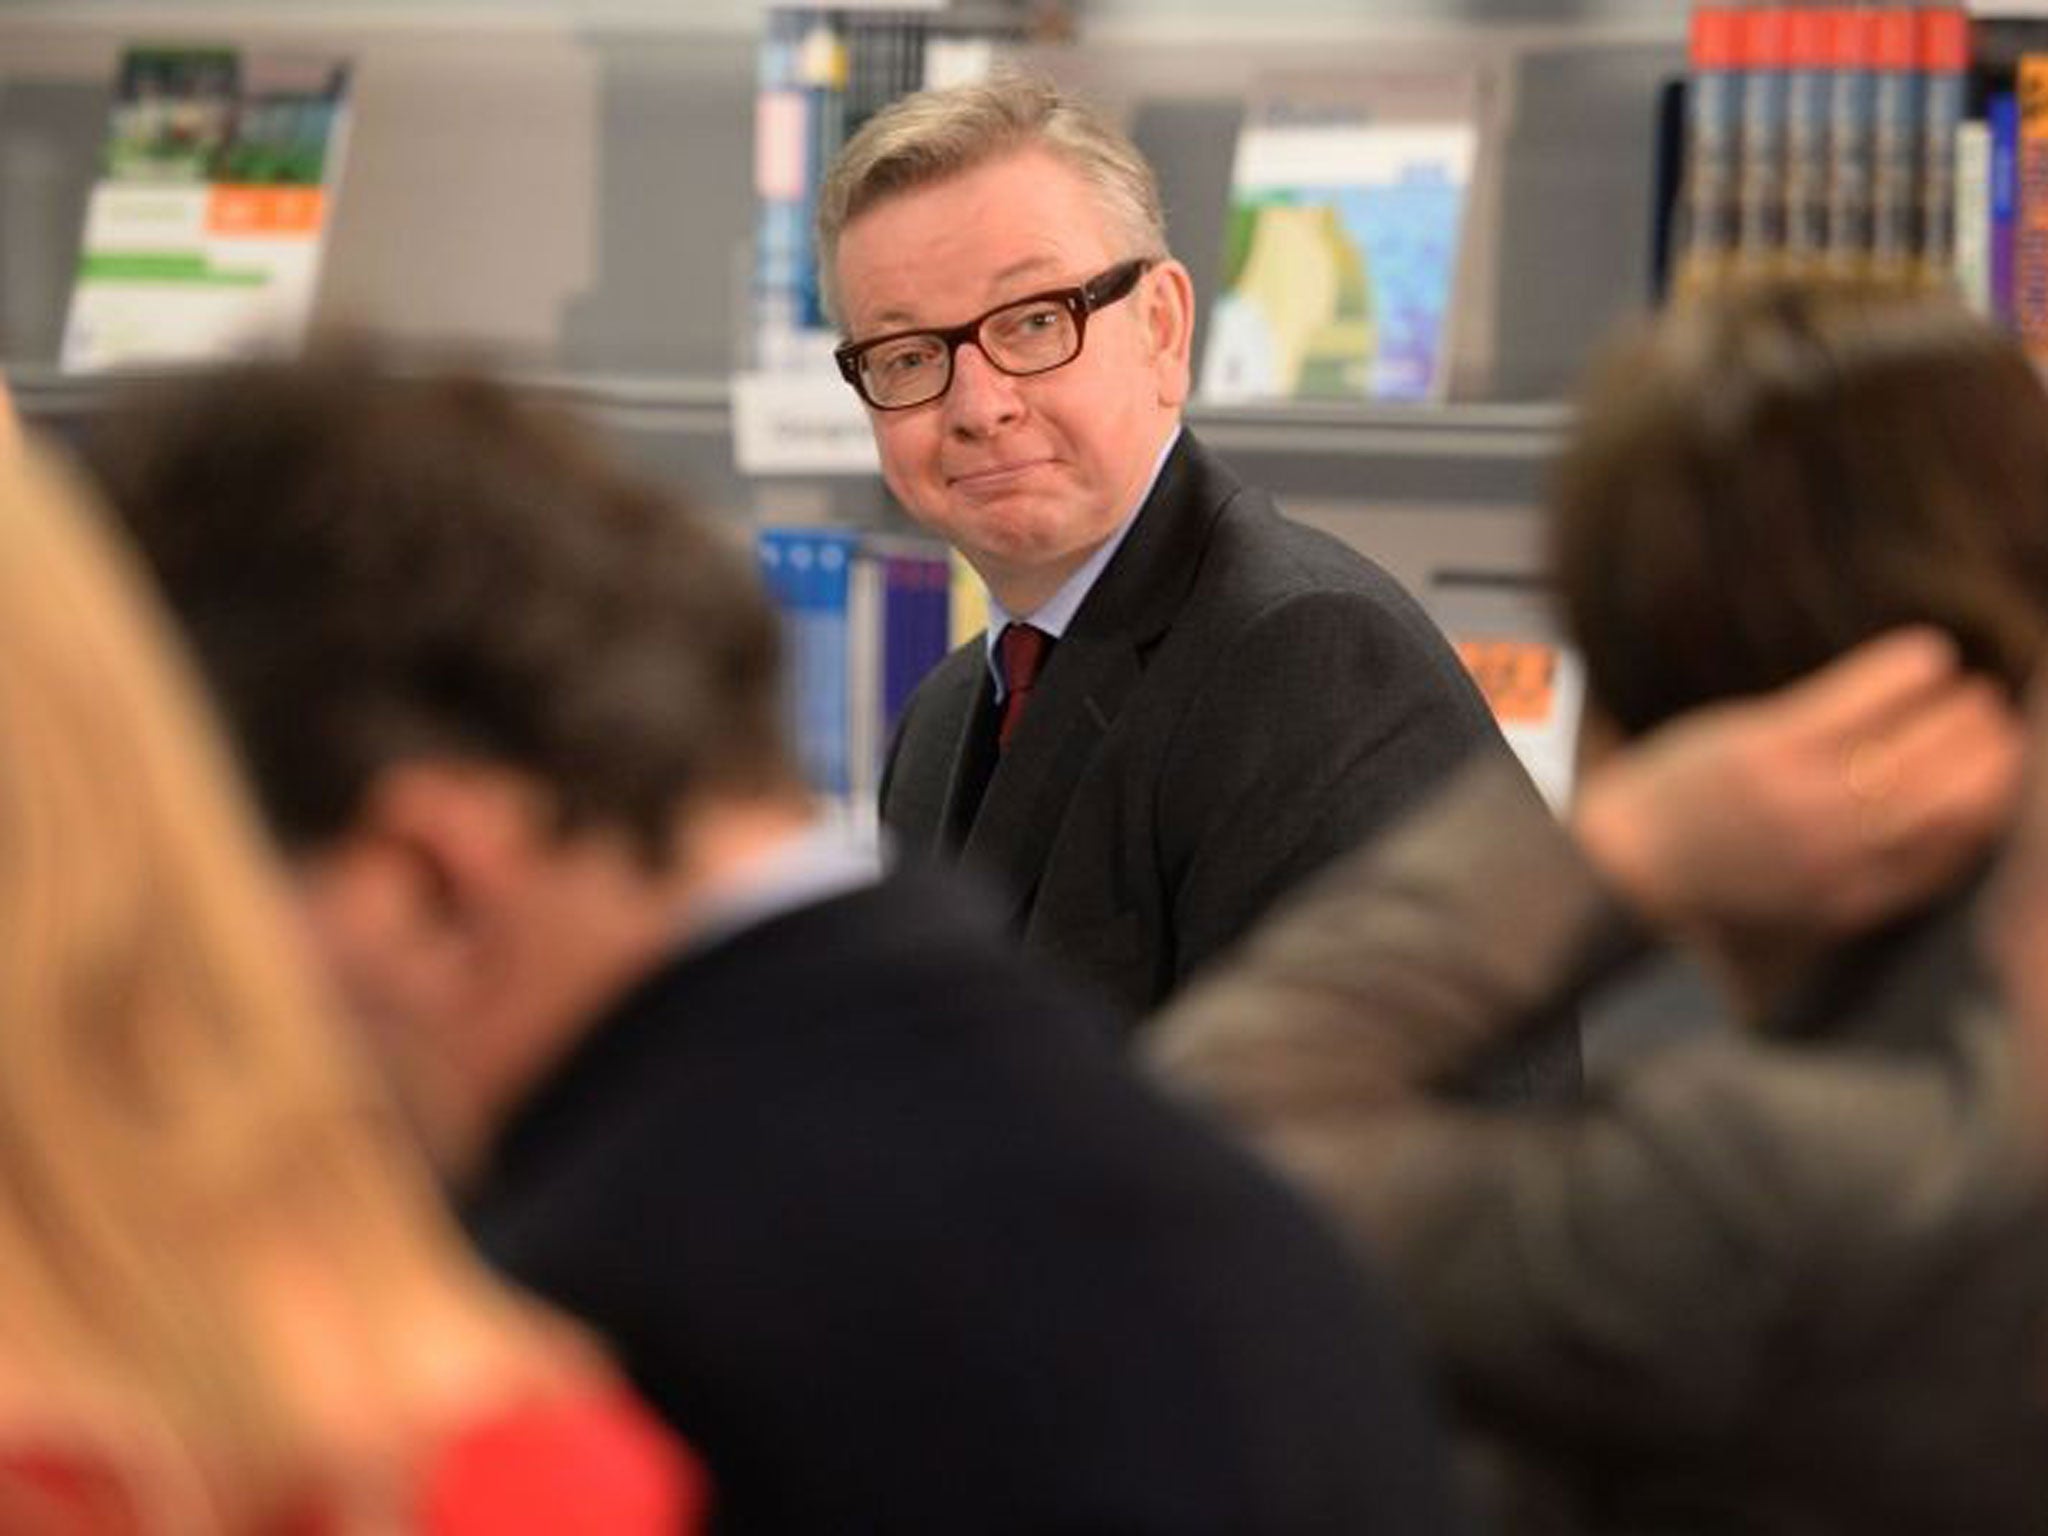 Education Secretary Michael Gove delivers a speech on education reform at the London Academy of Excellence in East London